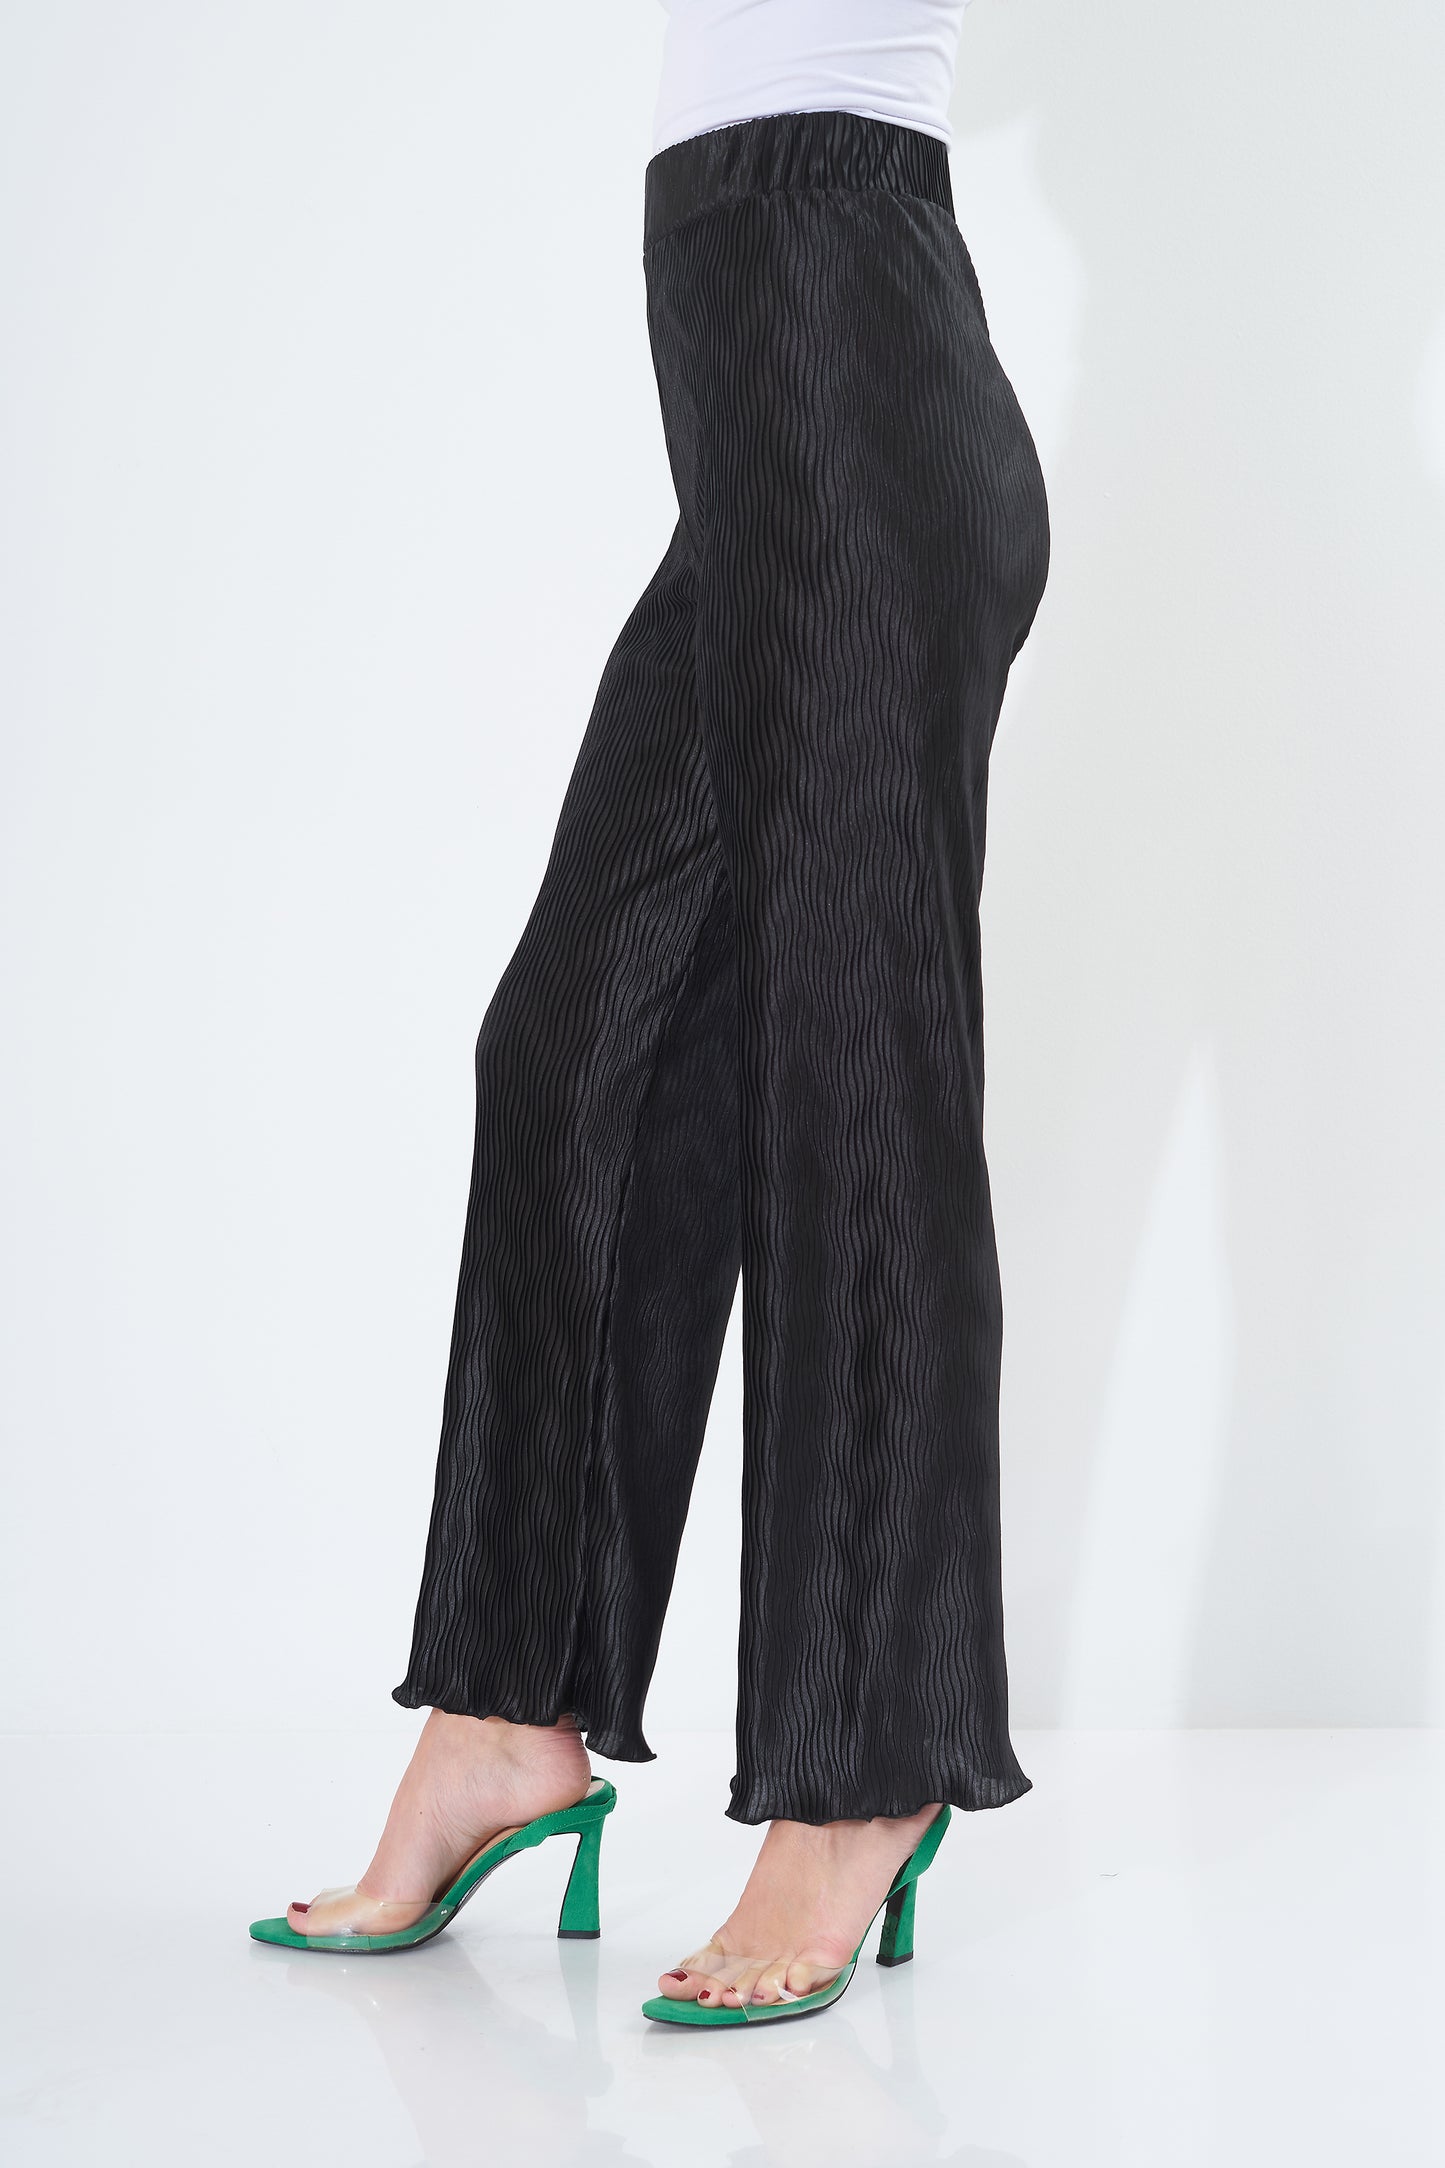 Trouser Satin - Pleated ( Colors )